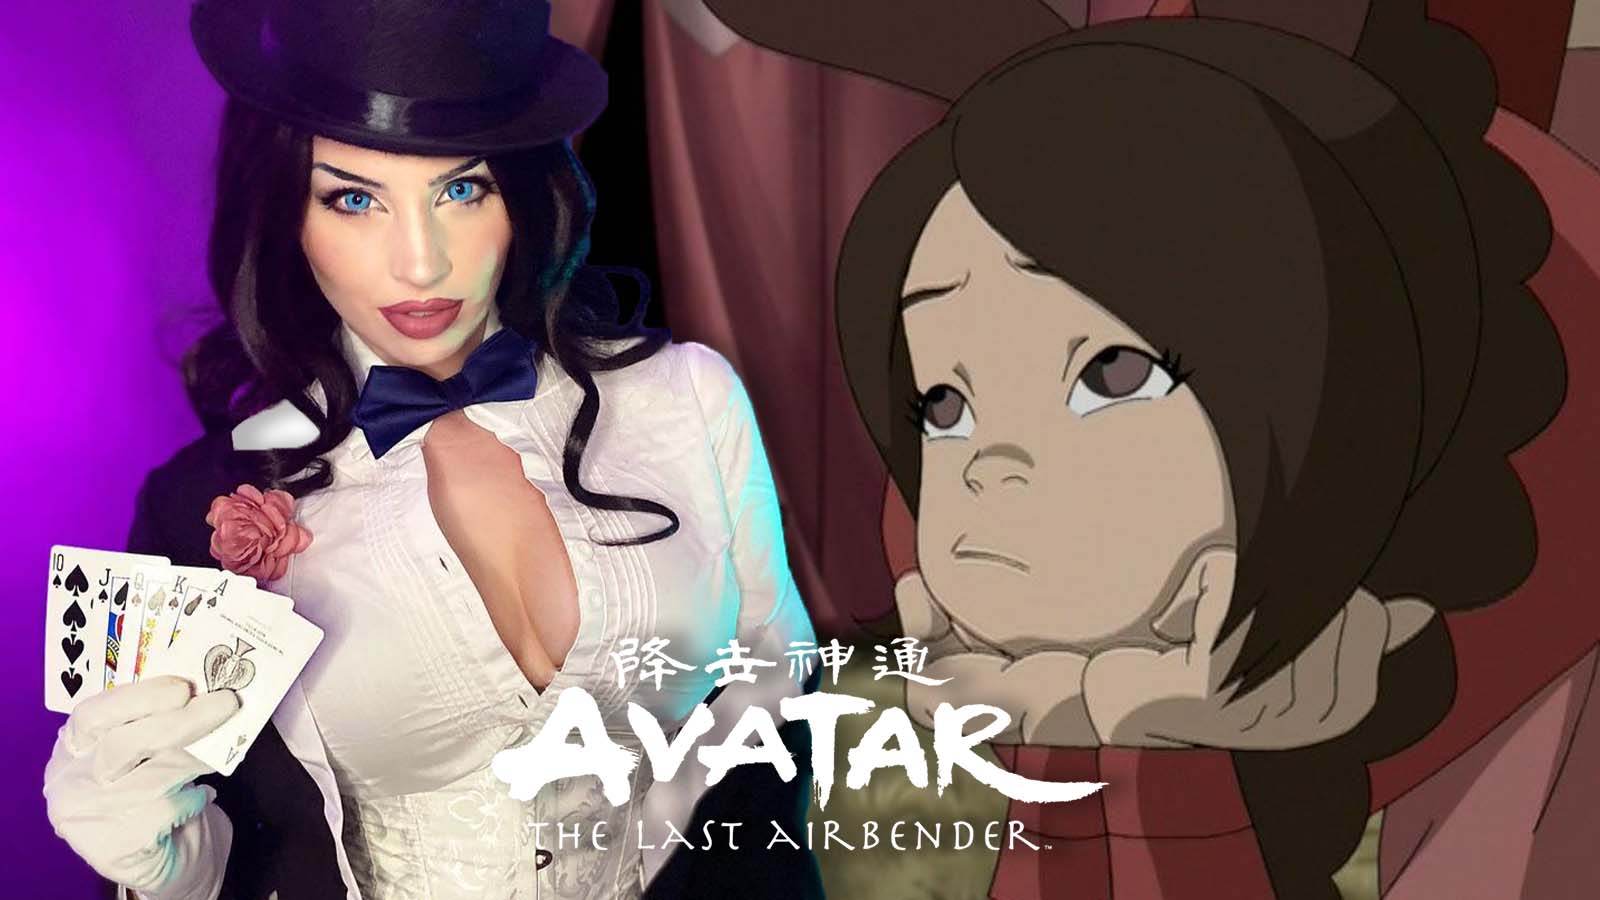 Avatar: The Last Airbender Ty Lee cosplay